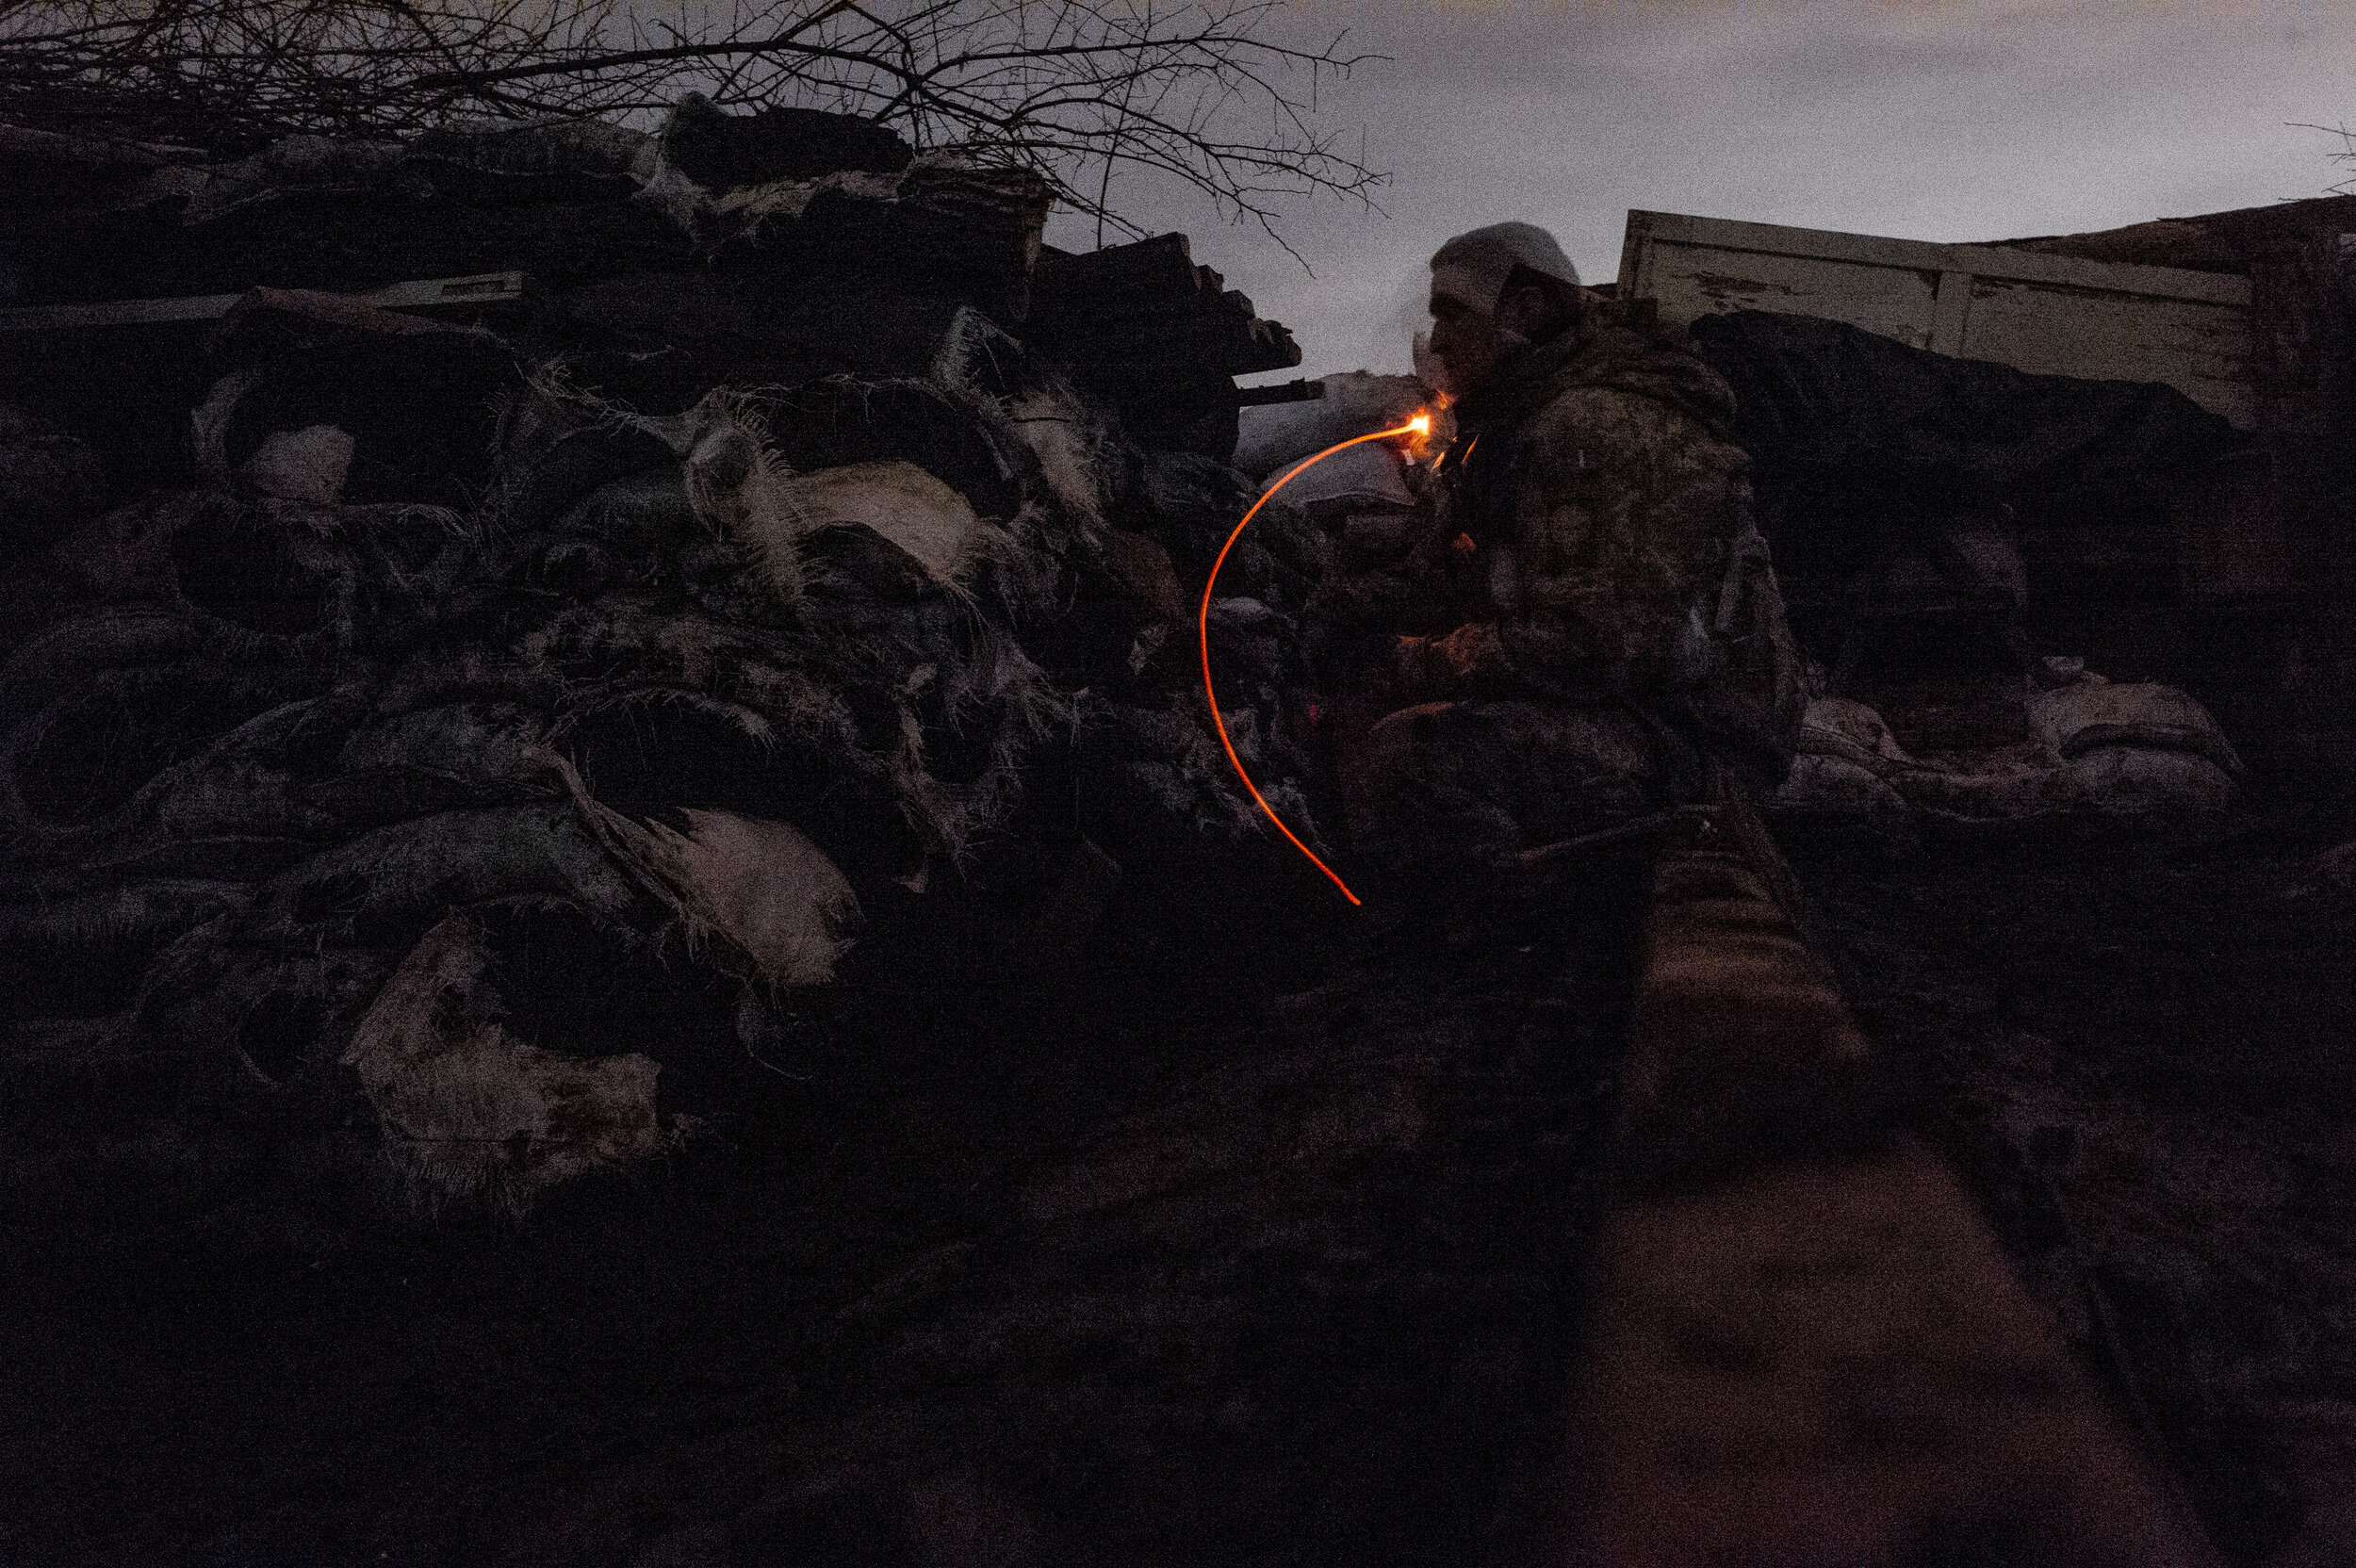  A Ukrainian soldier smokes a cigarette at ‘Point Zero’ in Zolote-4 as nightly firefights kick-off between soldiers and Russian backed separatists.  While occasional gun battles occur throughout the day time, heavy fighting is reserved for the night.